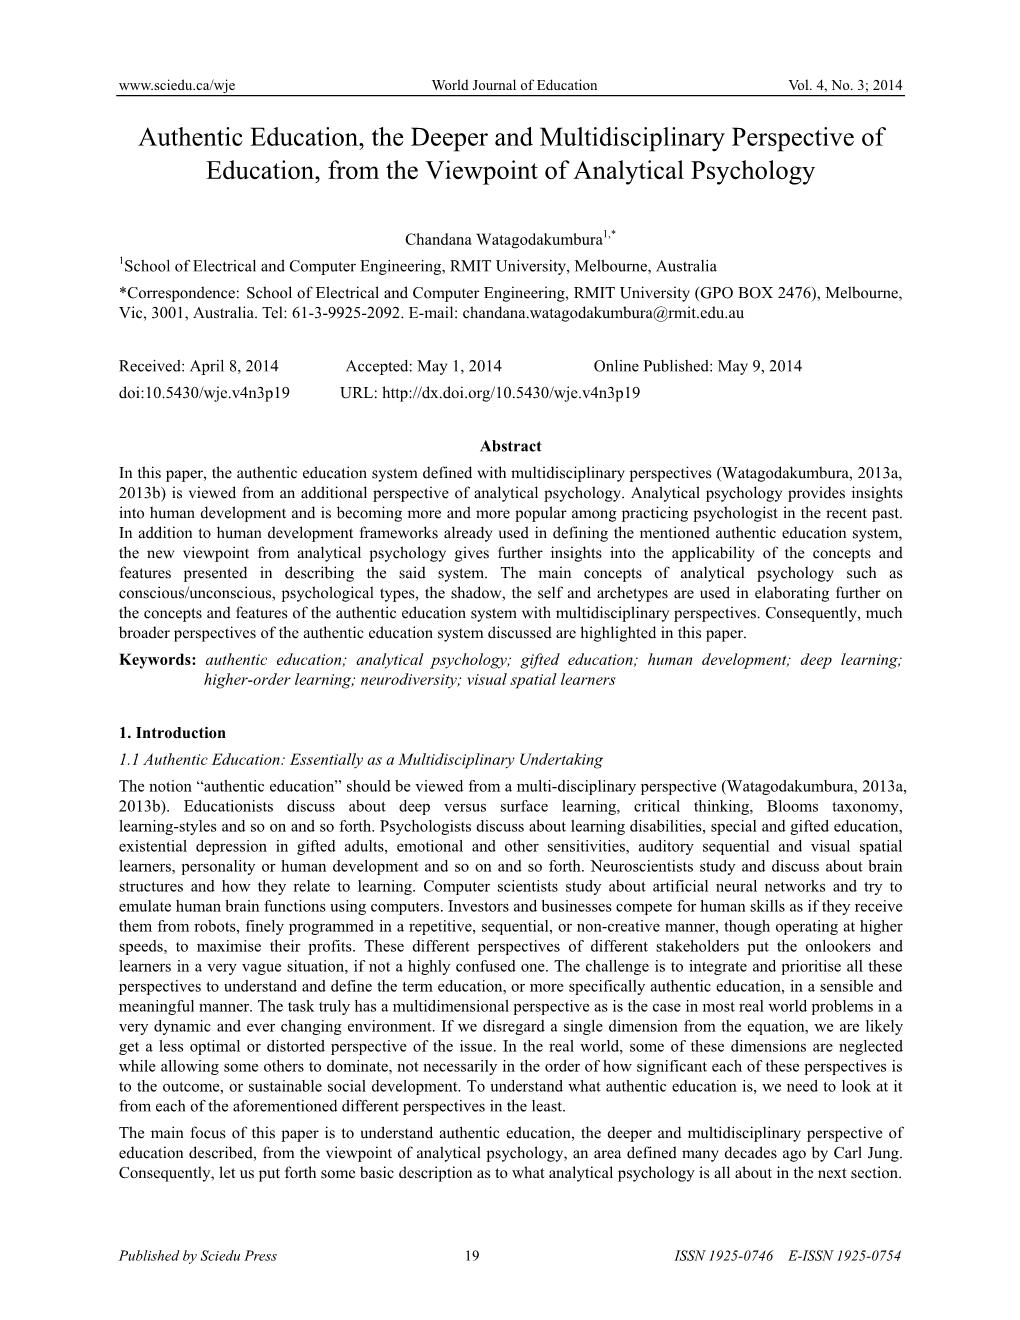 Authentic Education, the Deeper and Multidisciplinary Perspective of Education, from the Viewpoint of Analytical Psychology